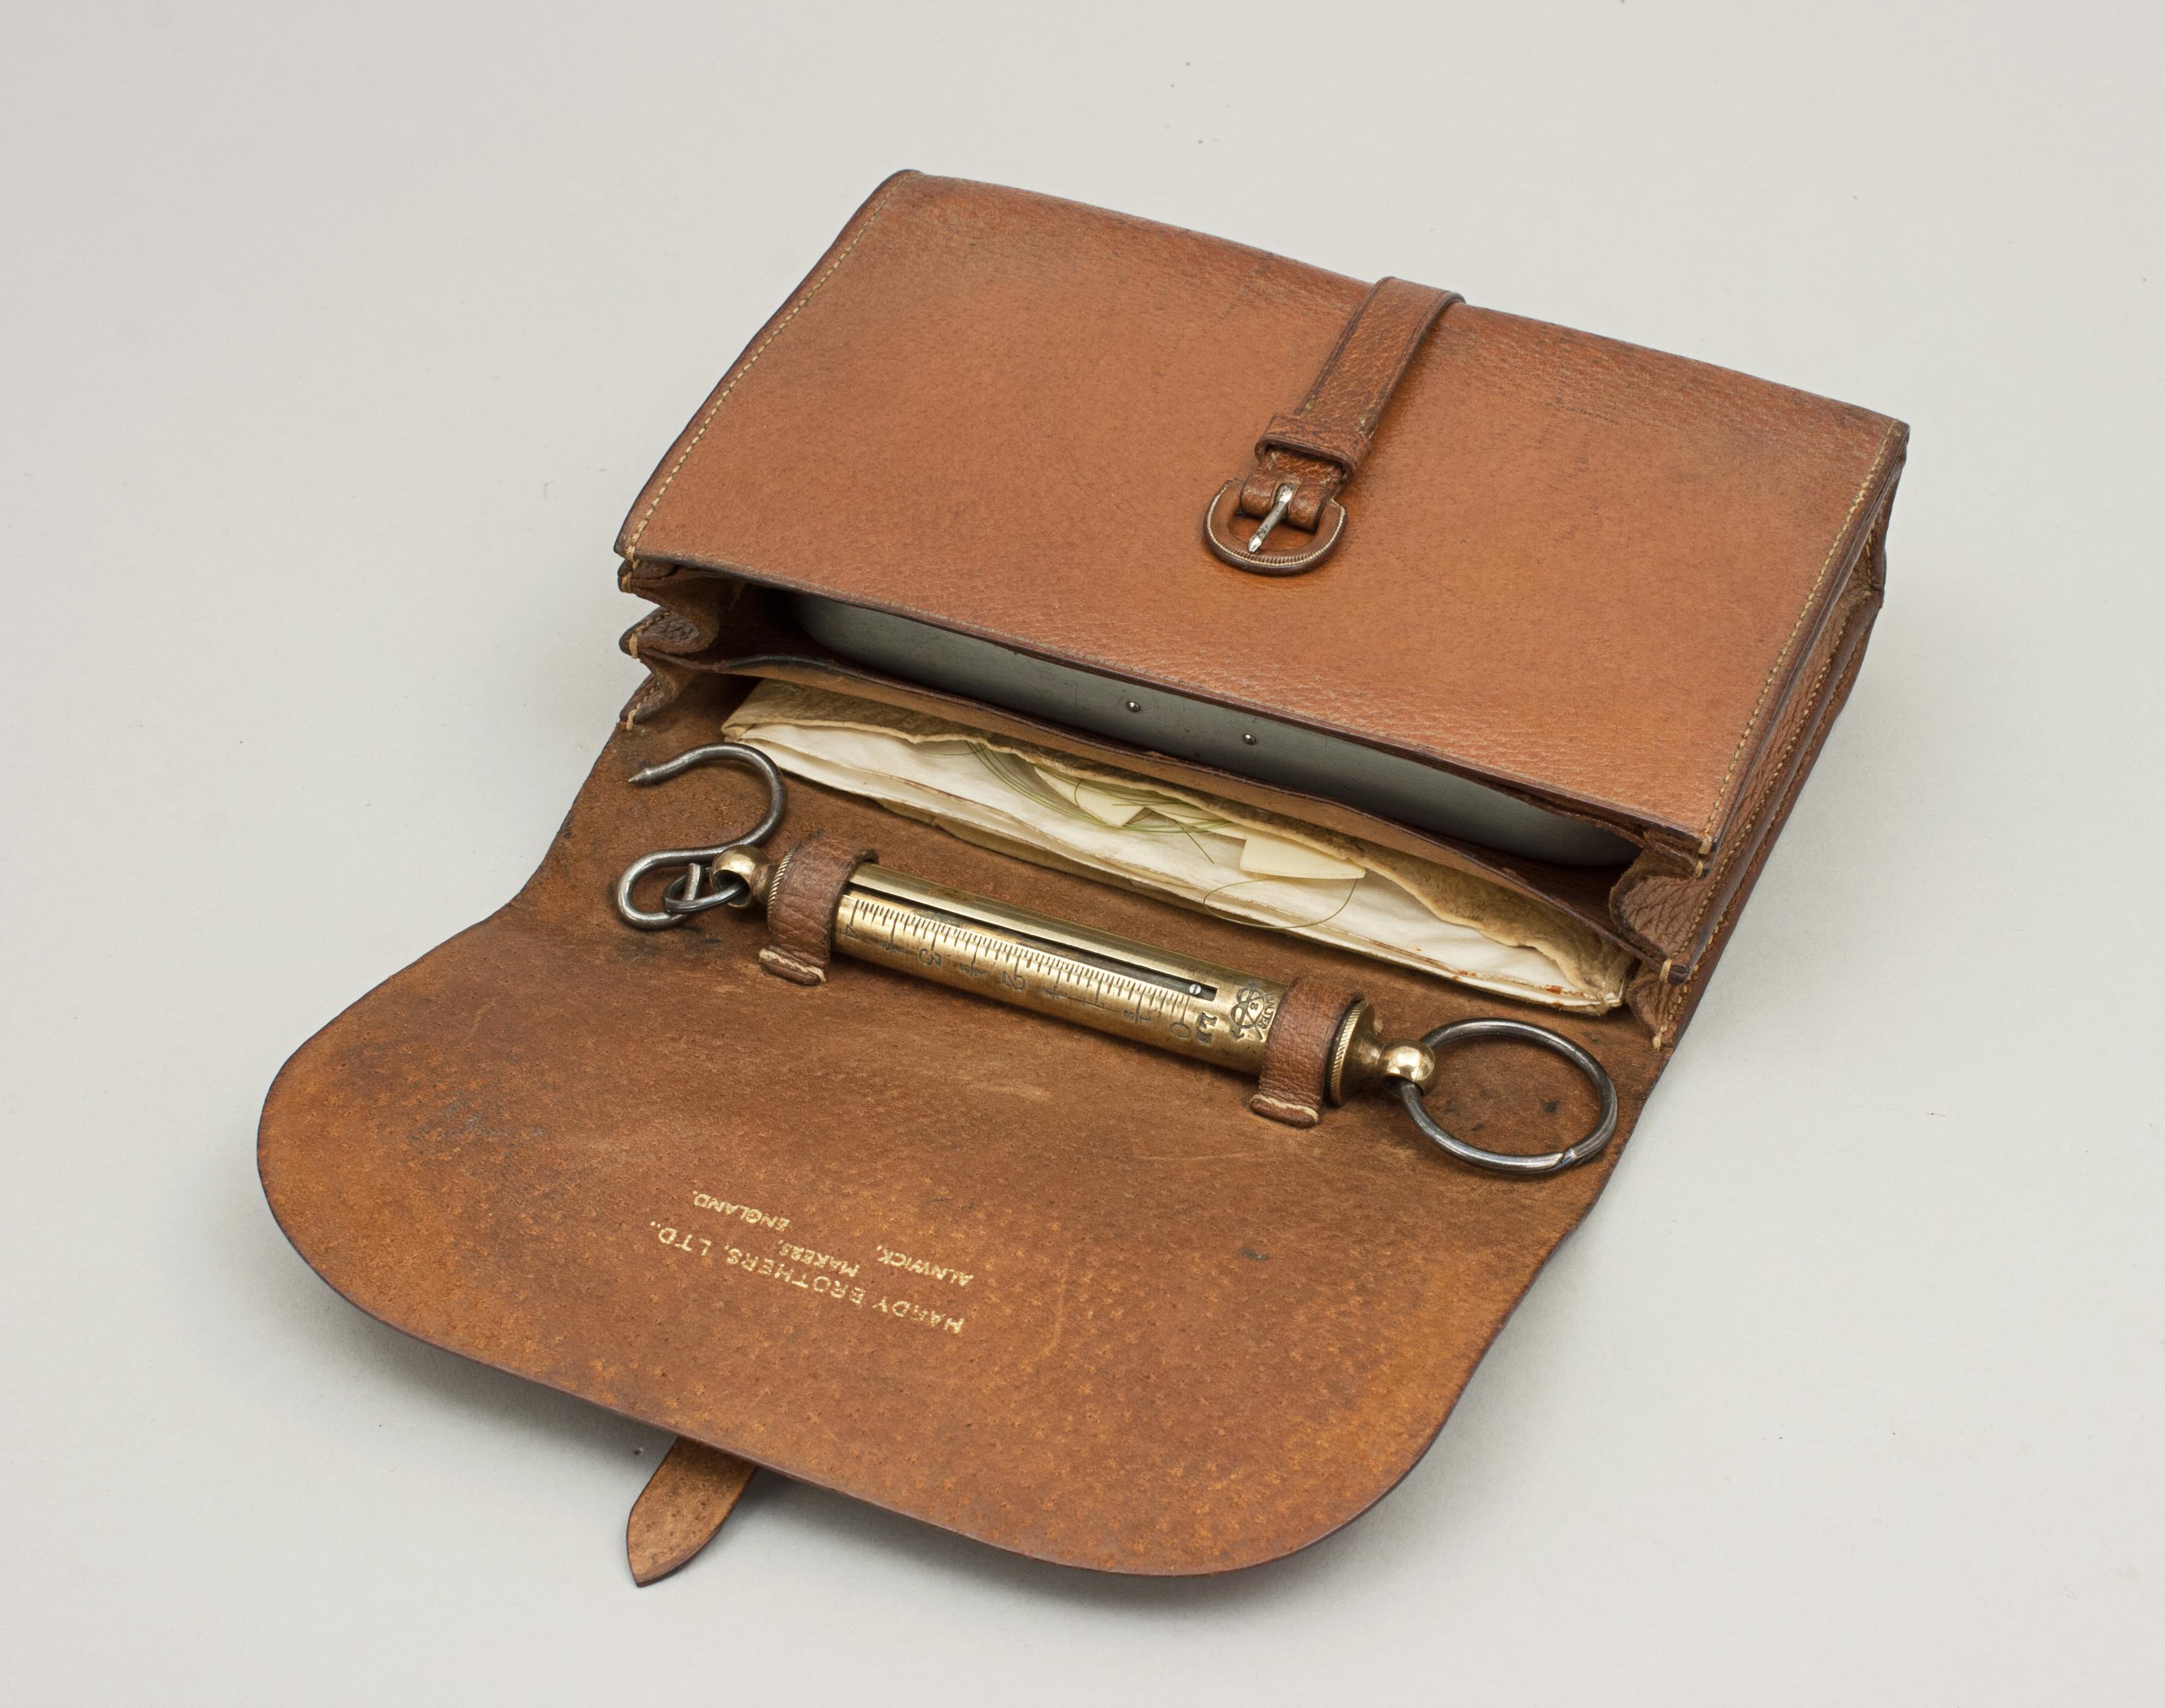 Hardy's fishing tackle wallet.
A great leather pigskin fishing tackle wallet the 'Allinone' made by the famous fishing tackle company Hardy of Alnwick. The case is embossed with gilt writing 'Hardy Brothers Ltd., Makers, Alnwick, England'. There is